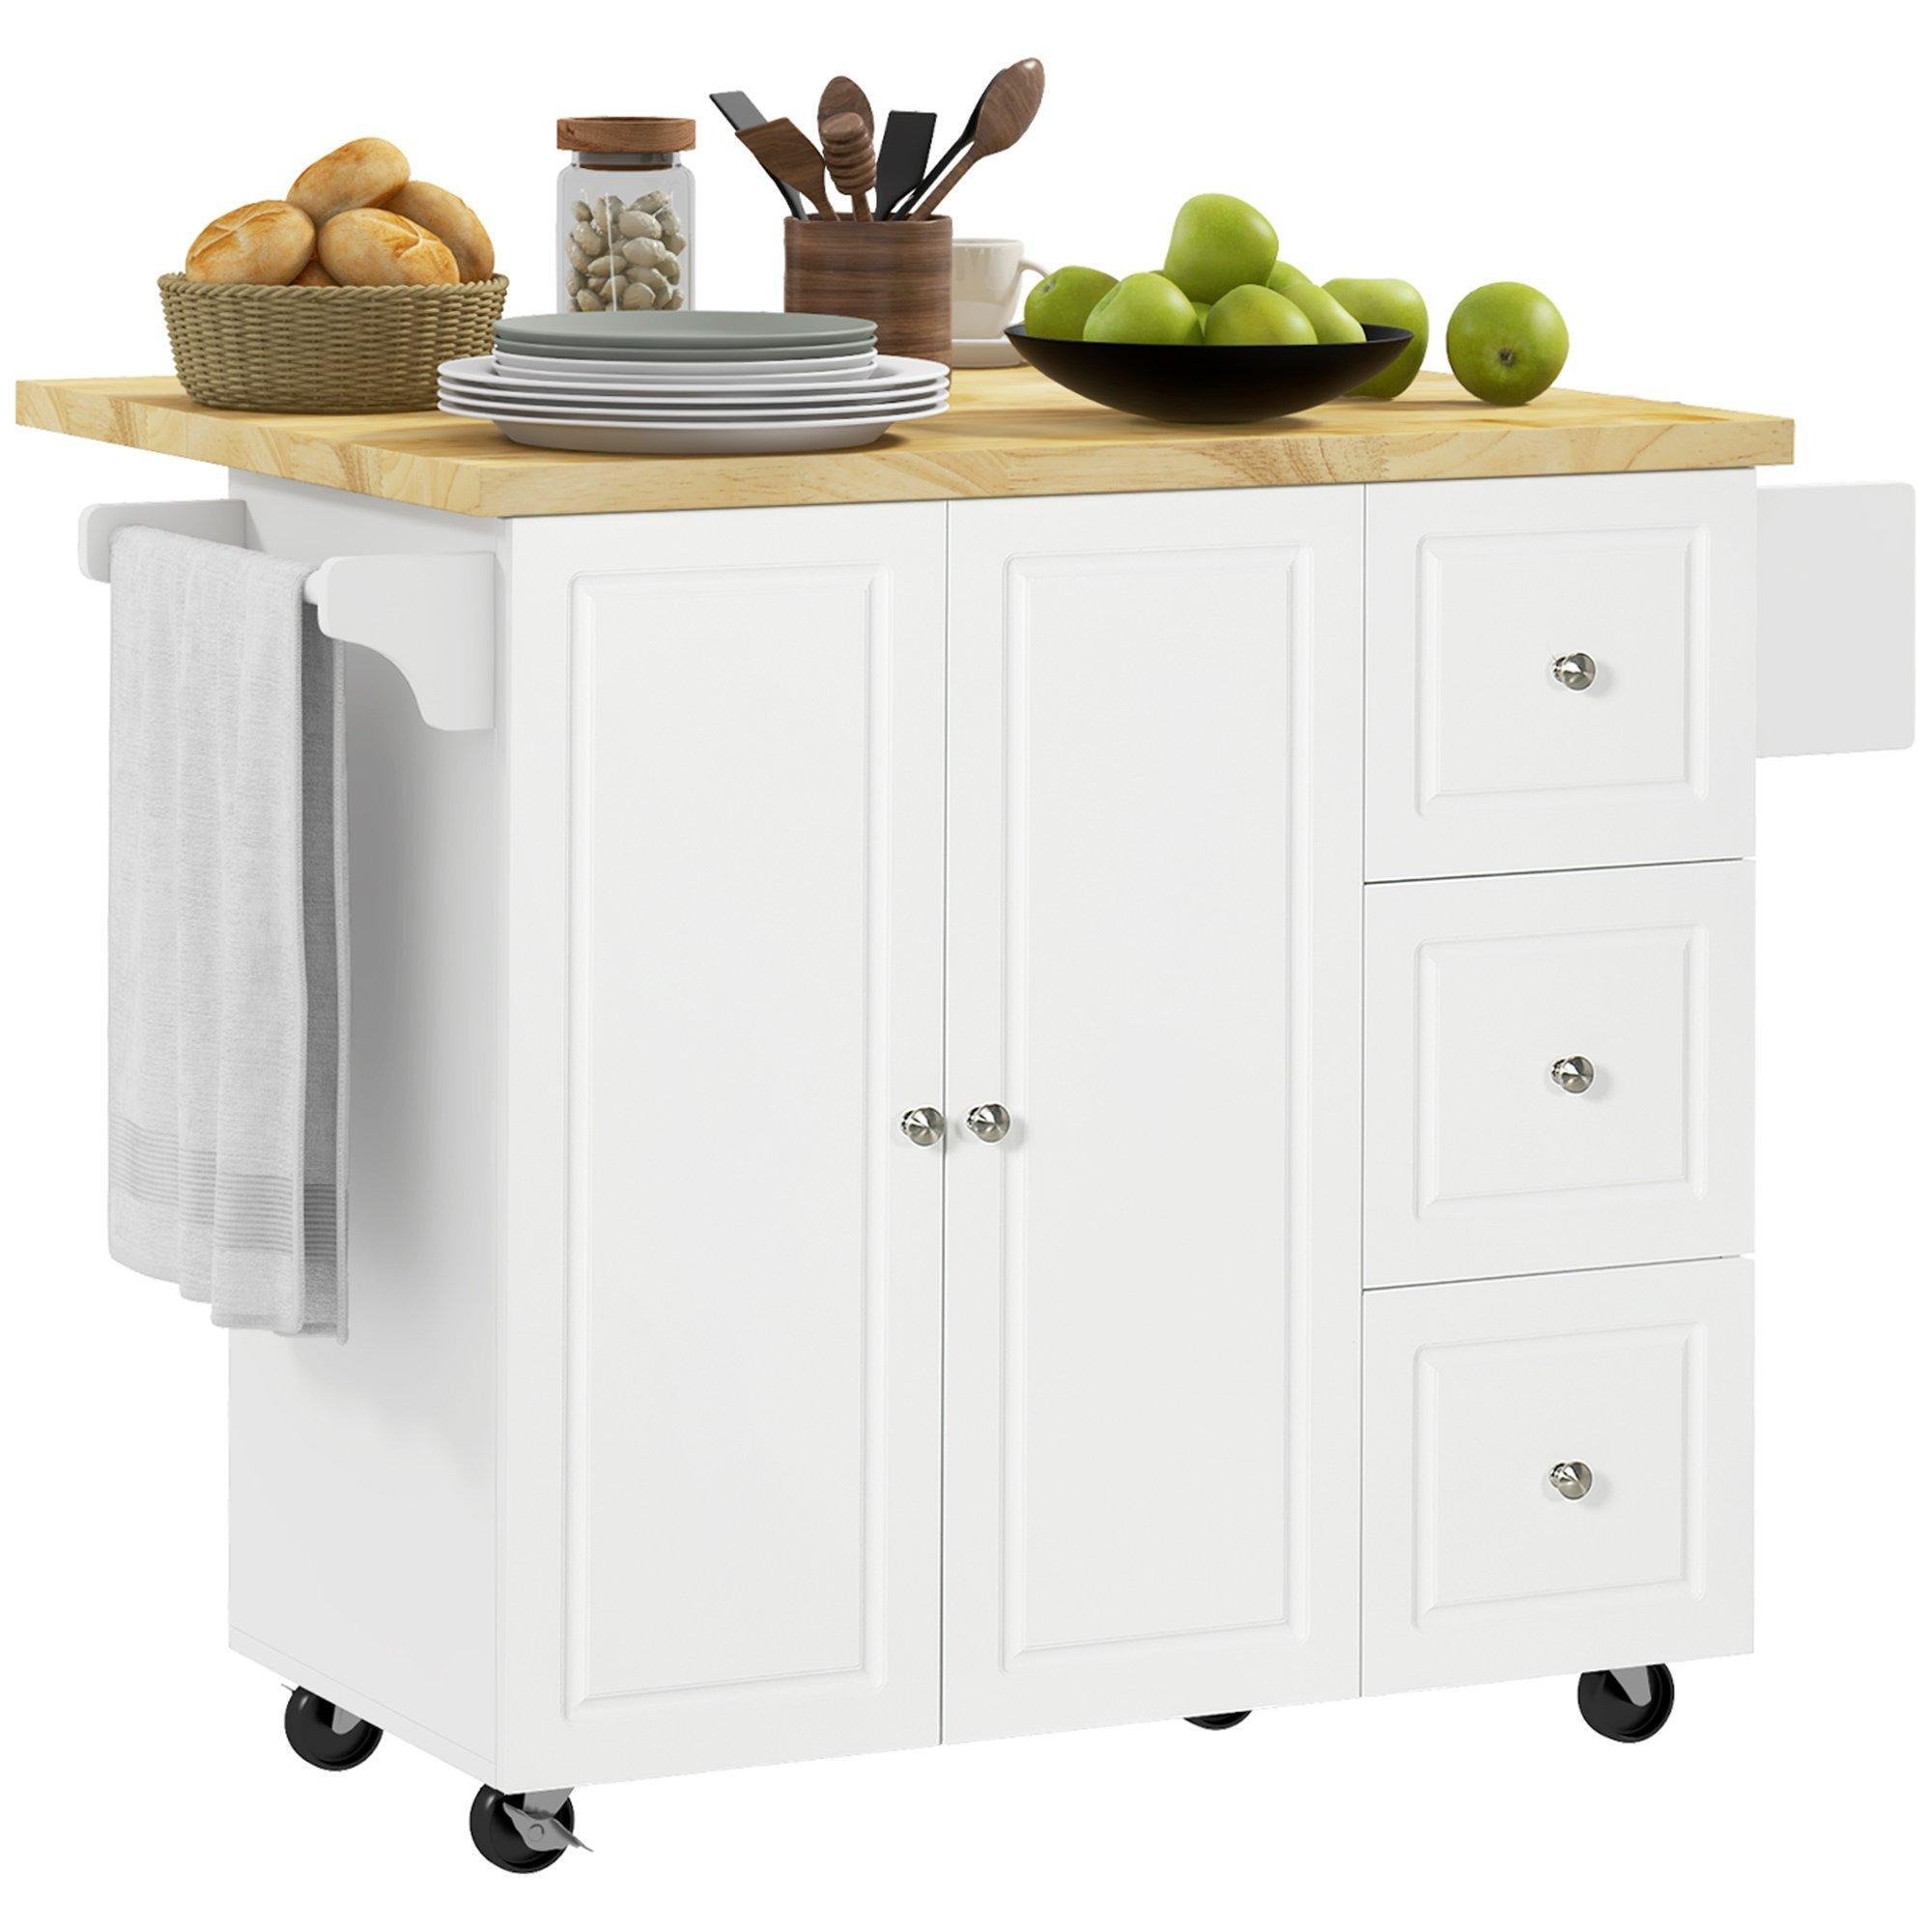 Drop Leaf Kitchen Island on Wheels Utility Storage Cart with Drawers - image 1